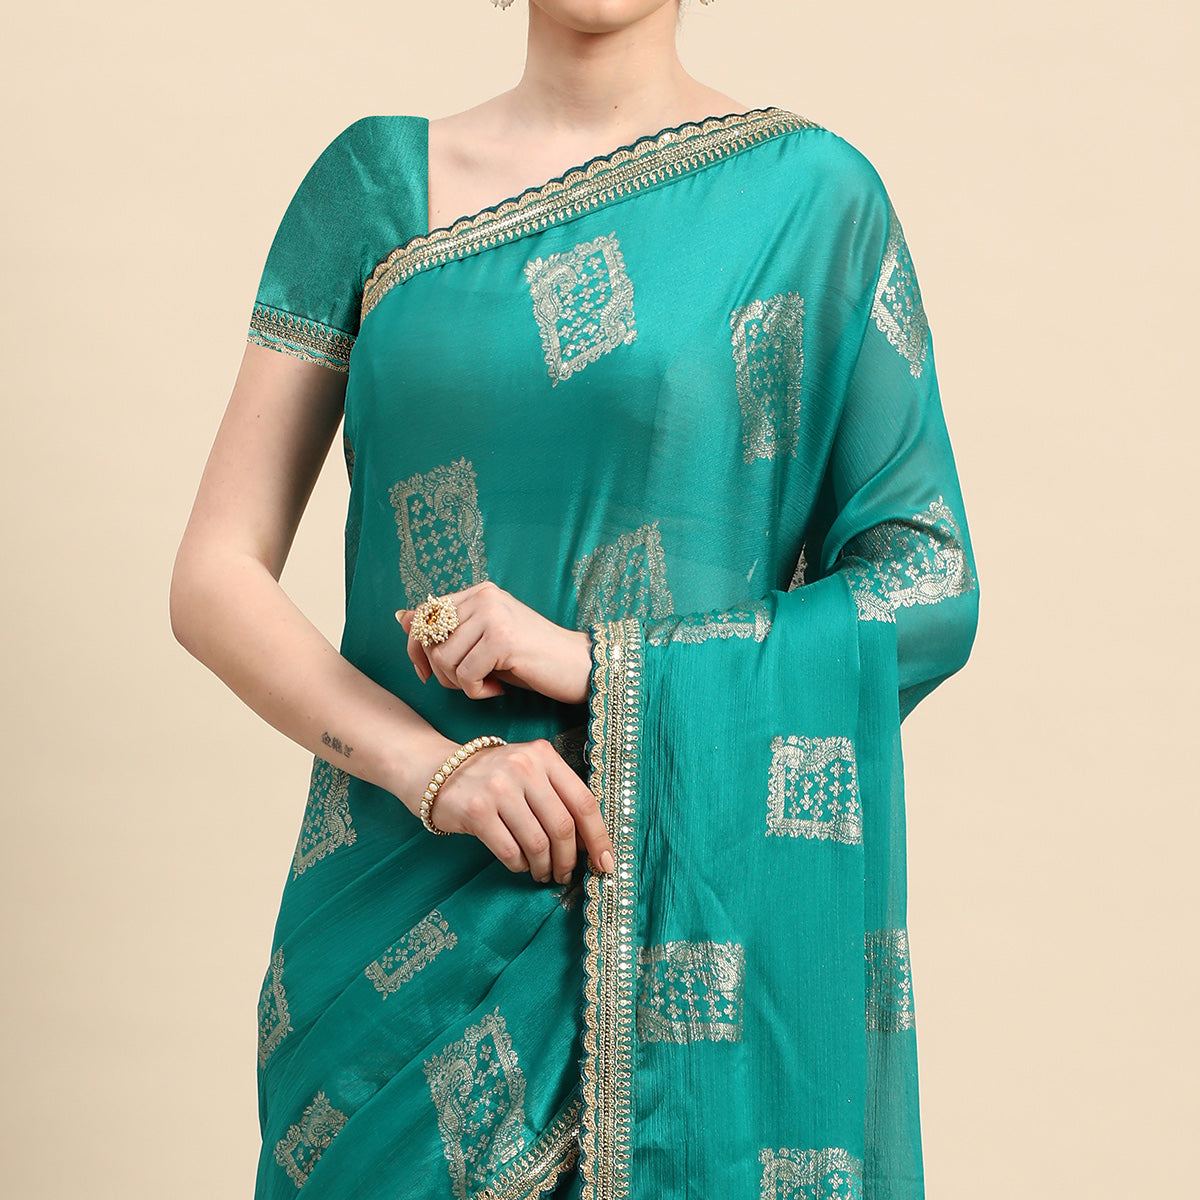 Turquoise Foil Printed With Embroidered Border Chiffon Saree